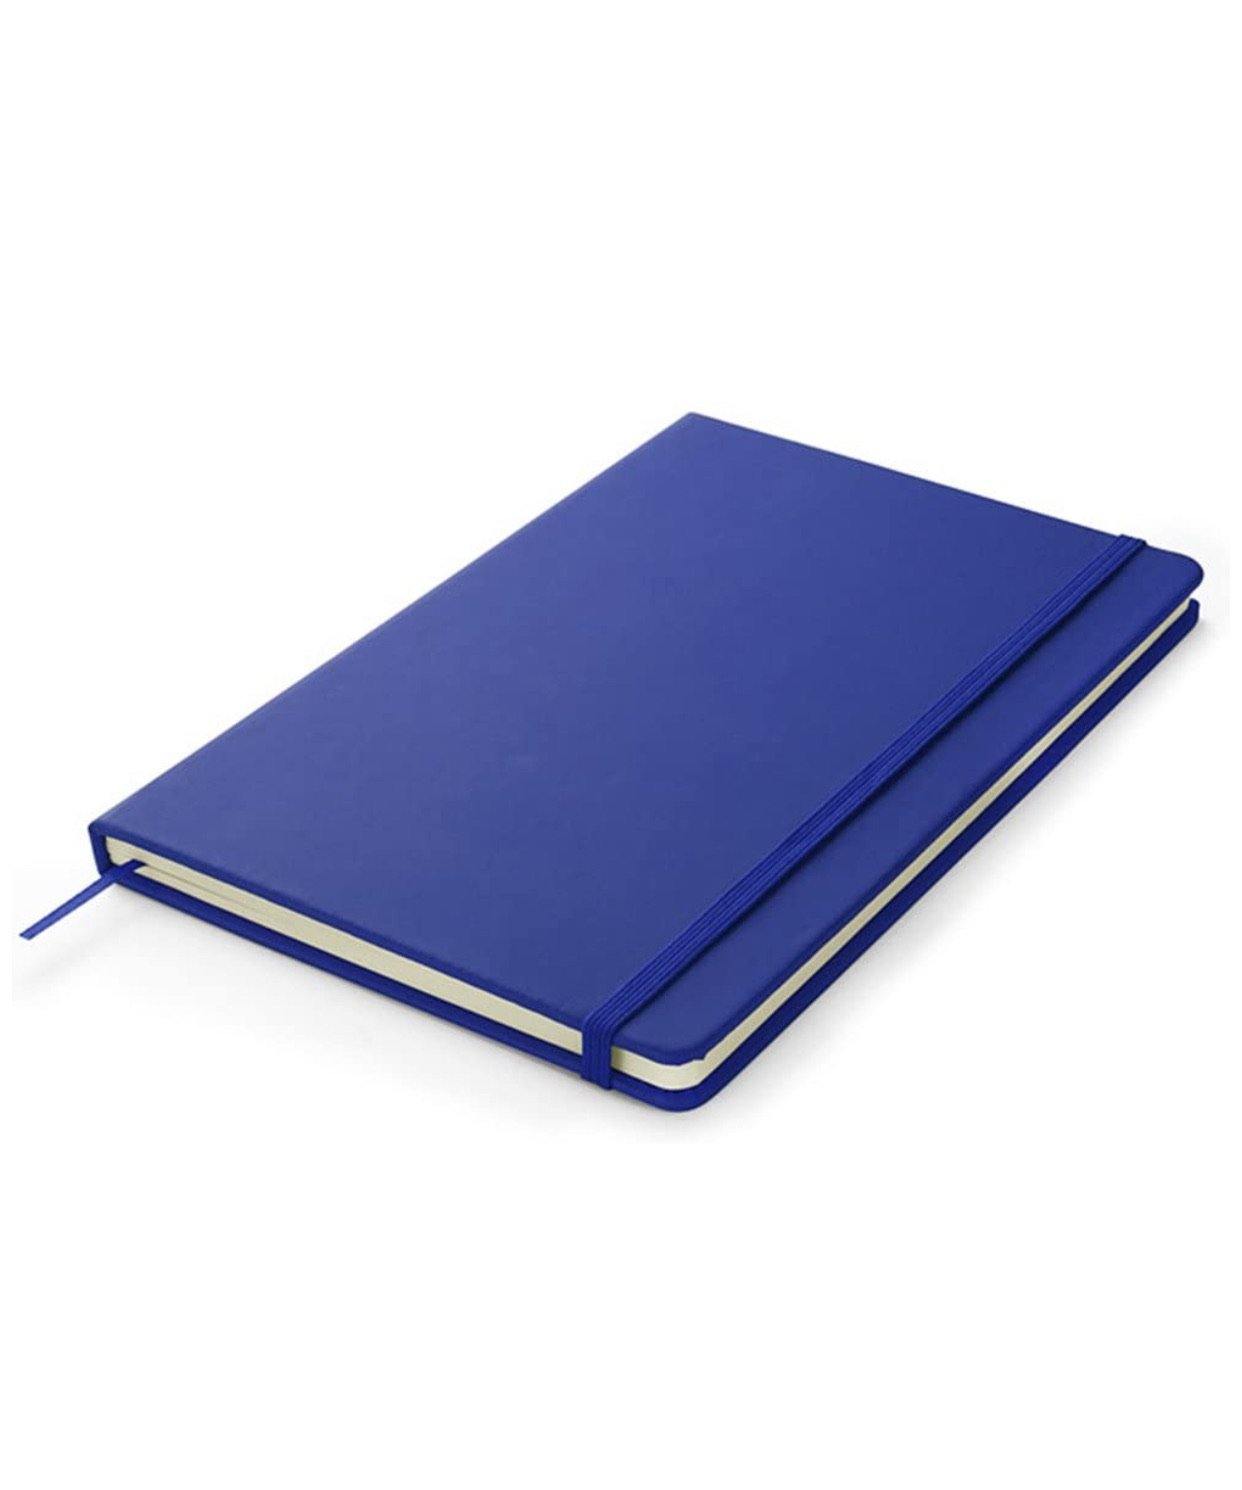 Notebook | Pu Leather Hardback Notebook With Lined Sheets | Personalised With Your Initials Or Name - PersonalisebyLisa